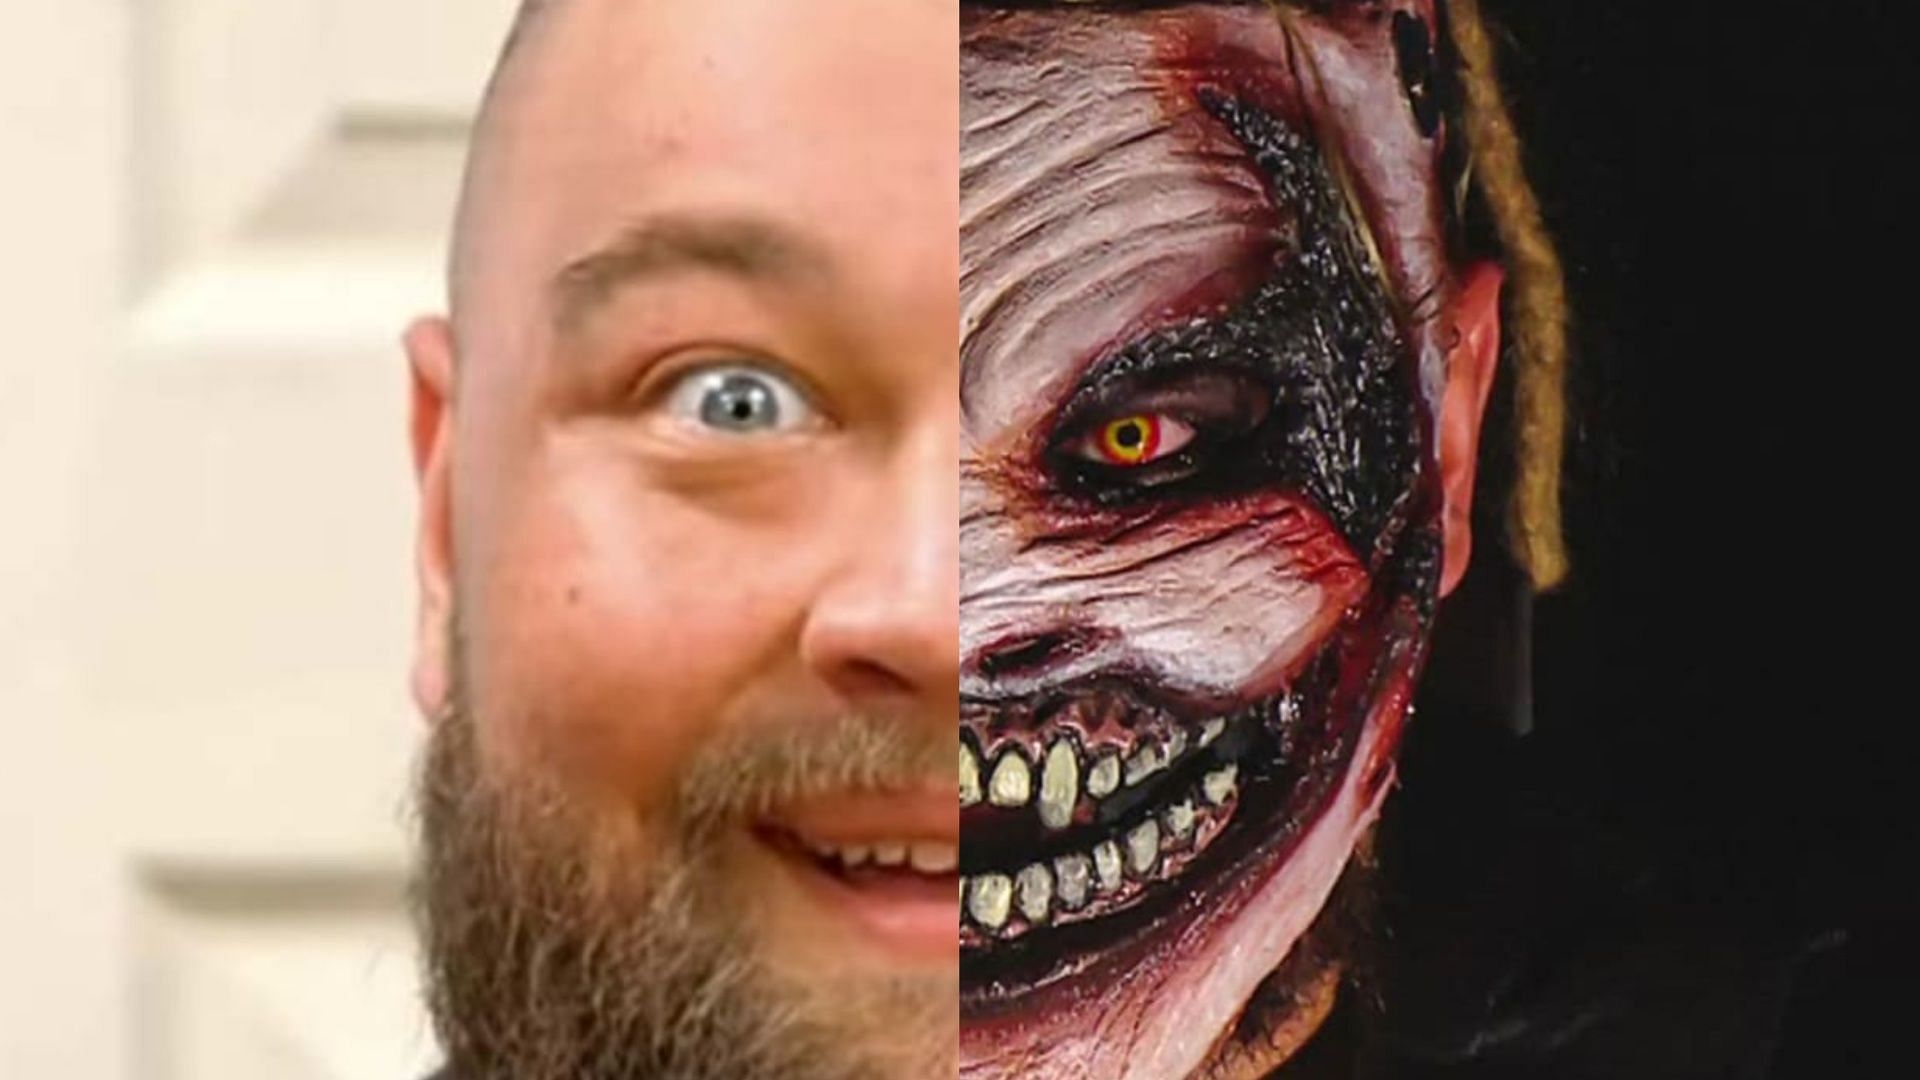 WWE Superstar Bray Wyatt and his alter ego, The Fiend.